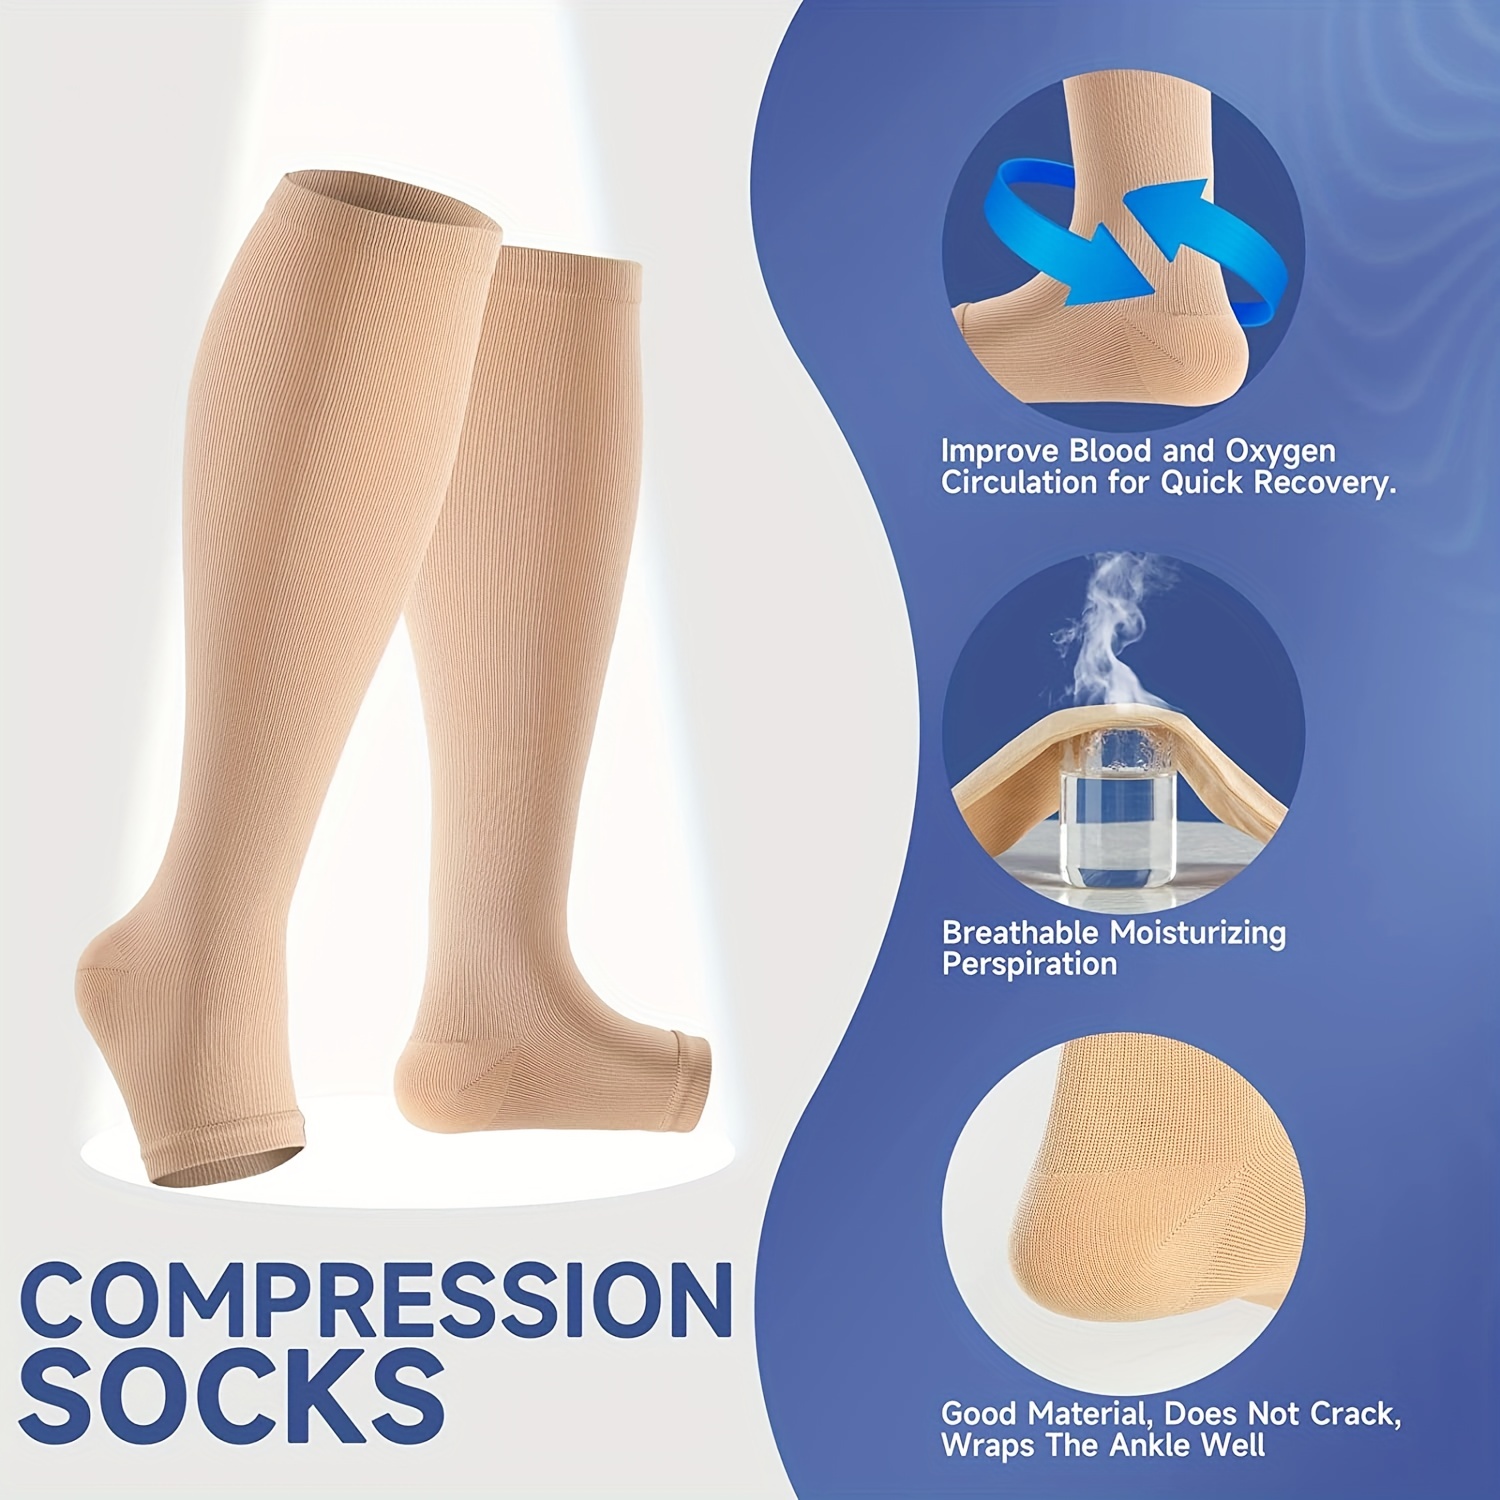 3 Pairs Compression Socks for Women 20-30 mmhg Knee High, Womens  Compression Socks Compression Stockings for Women